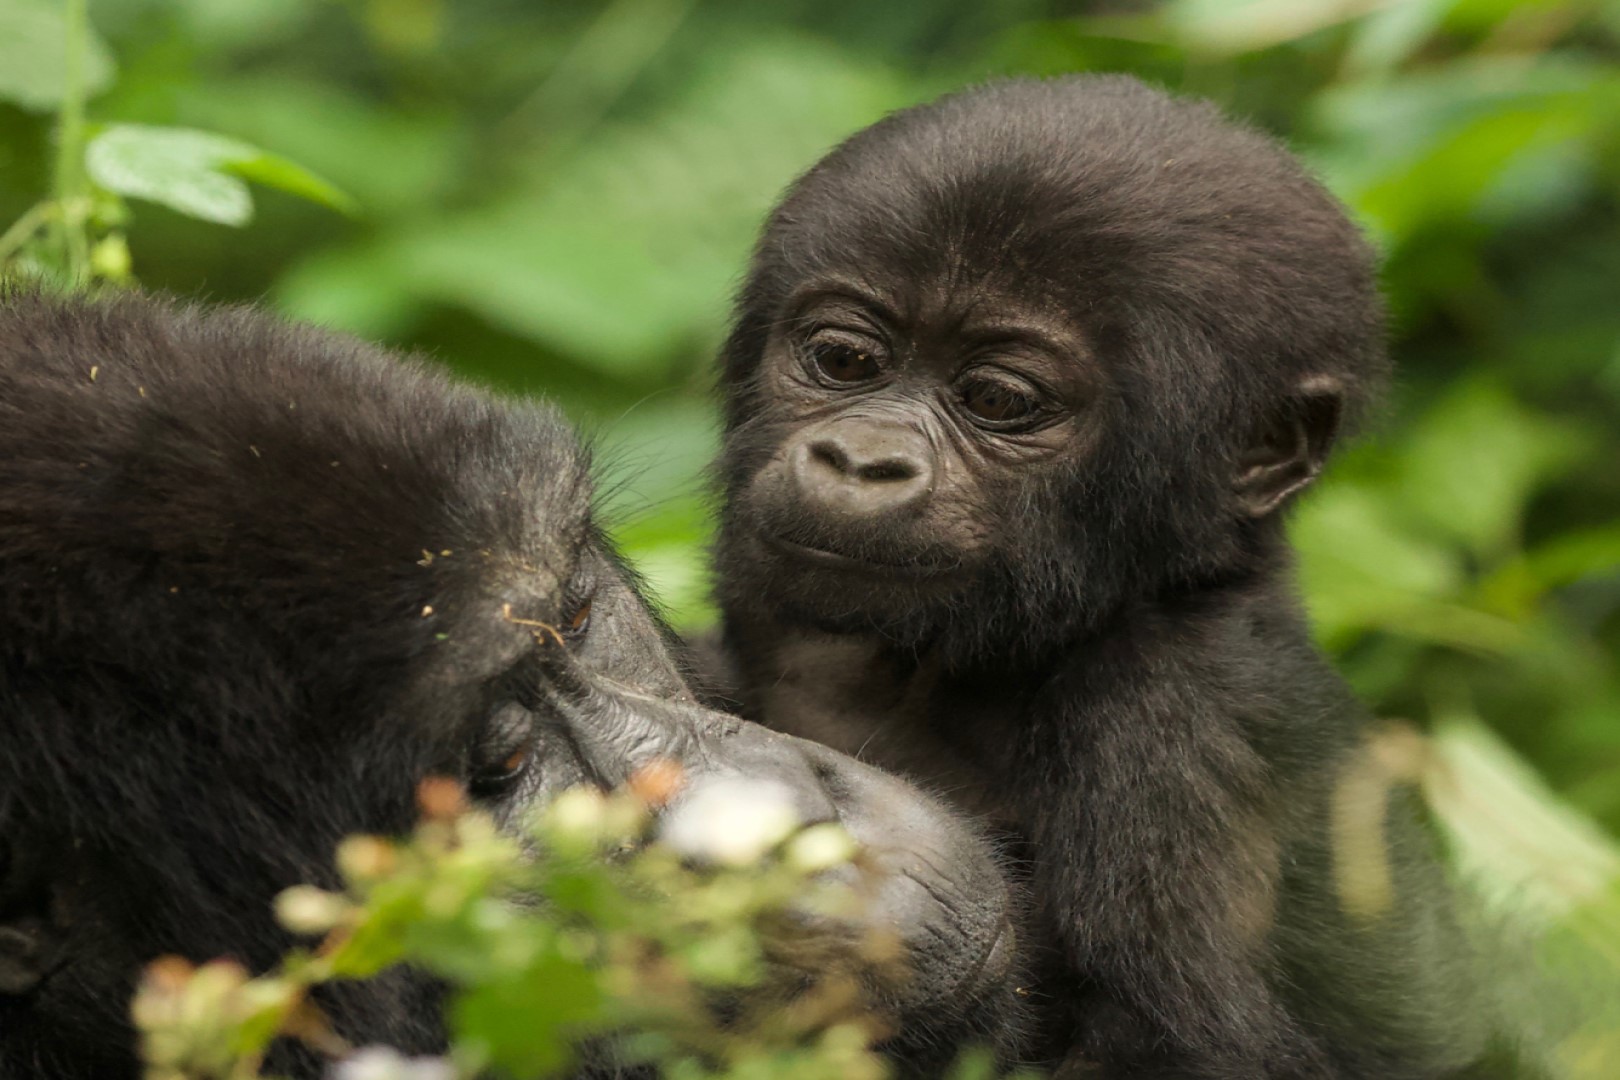 A baby gorilla with its mother